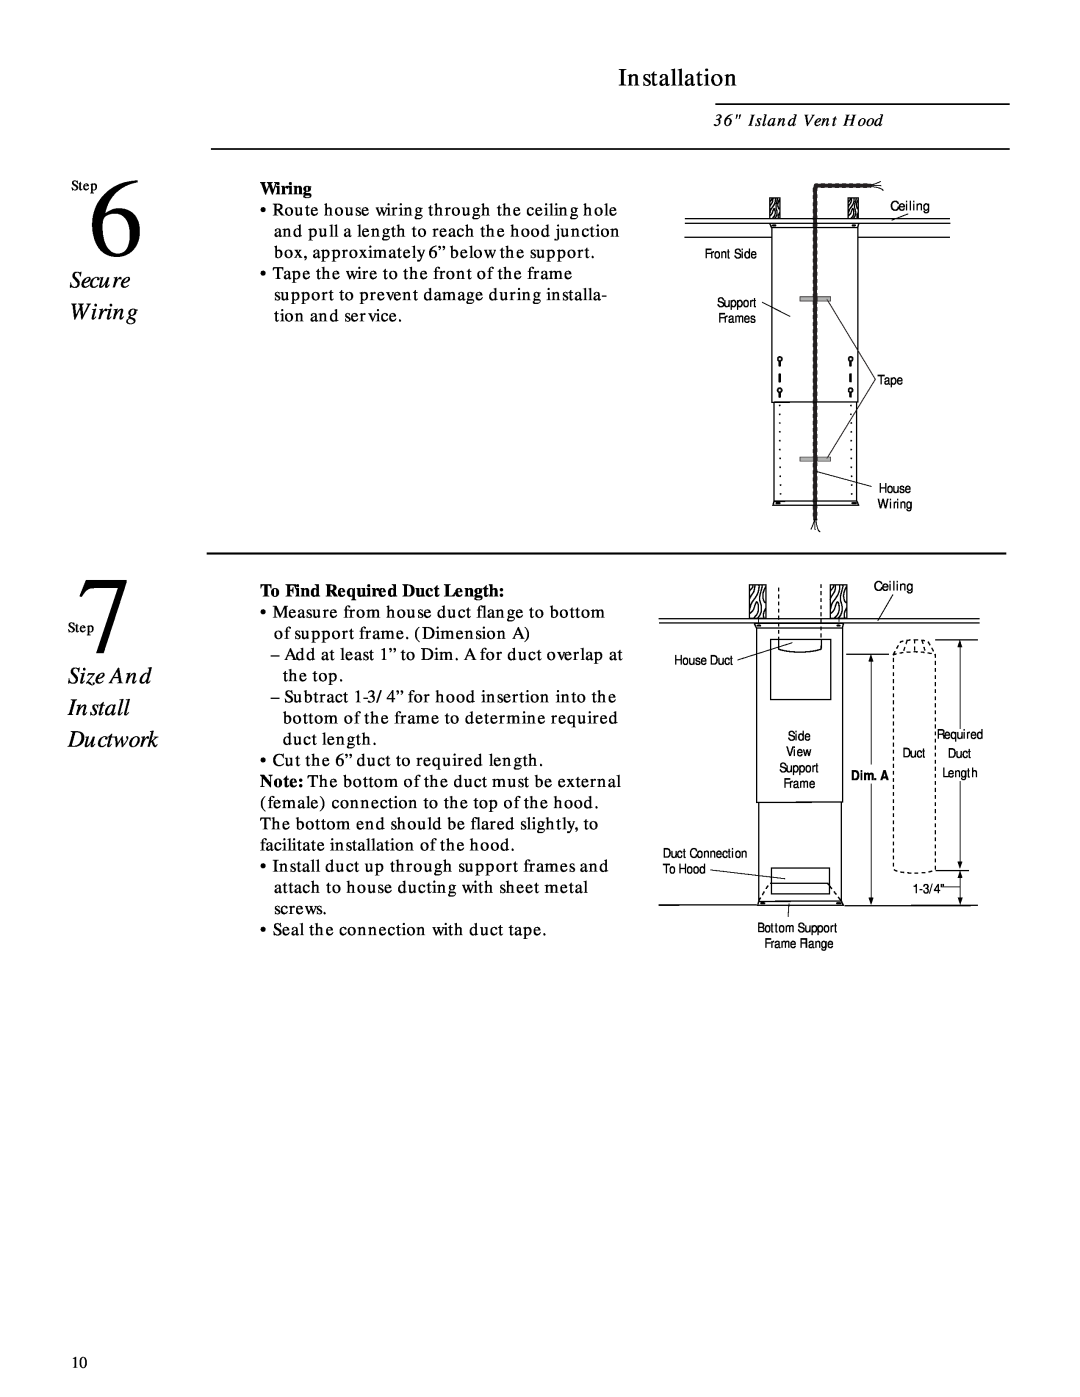 GE ZV850 installation instructions Secure Wiring, Size And Install Ductwork, To Find Required Duct Length, Installation 